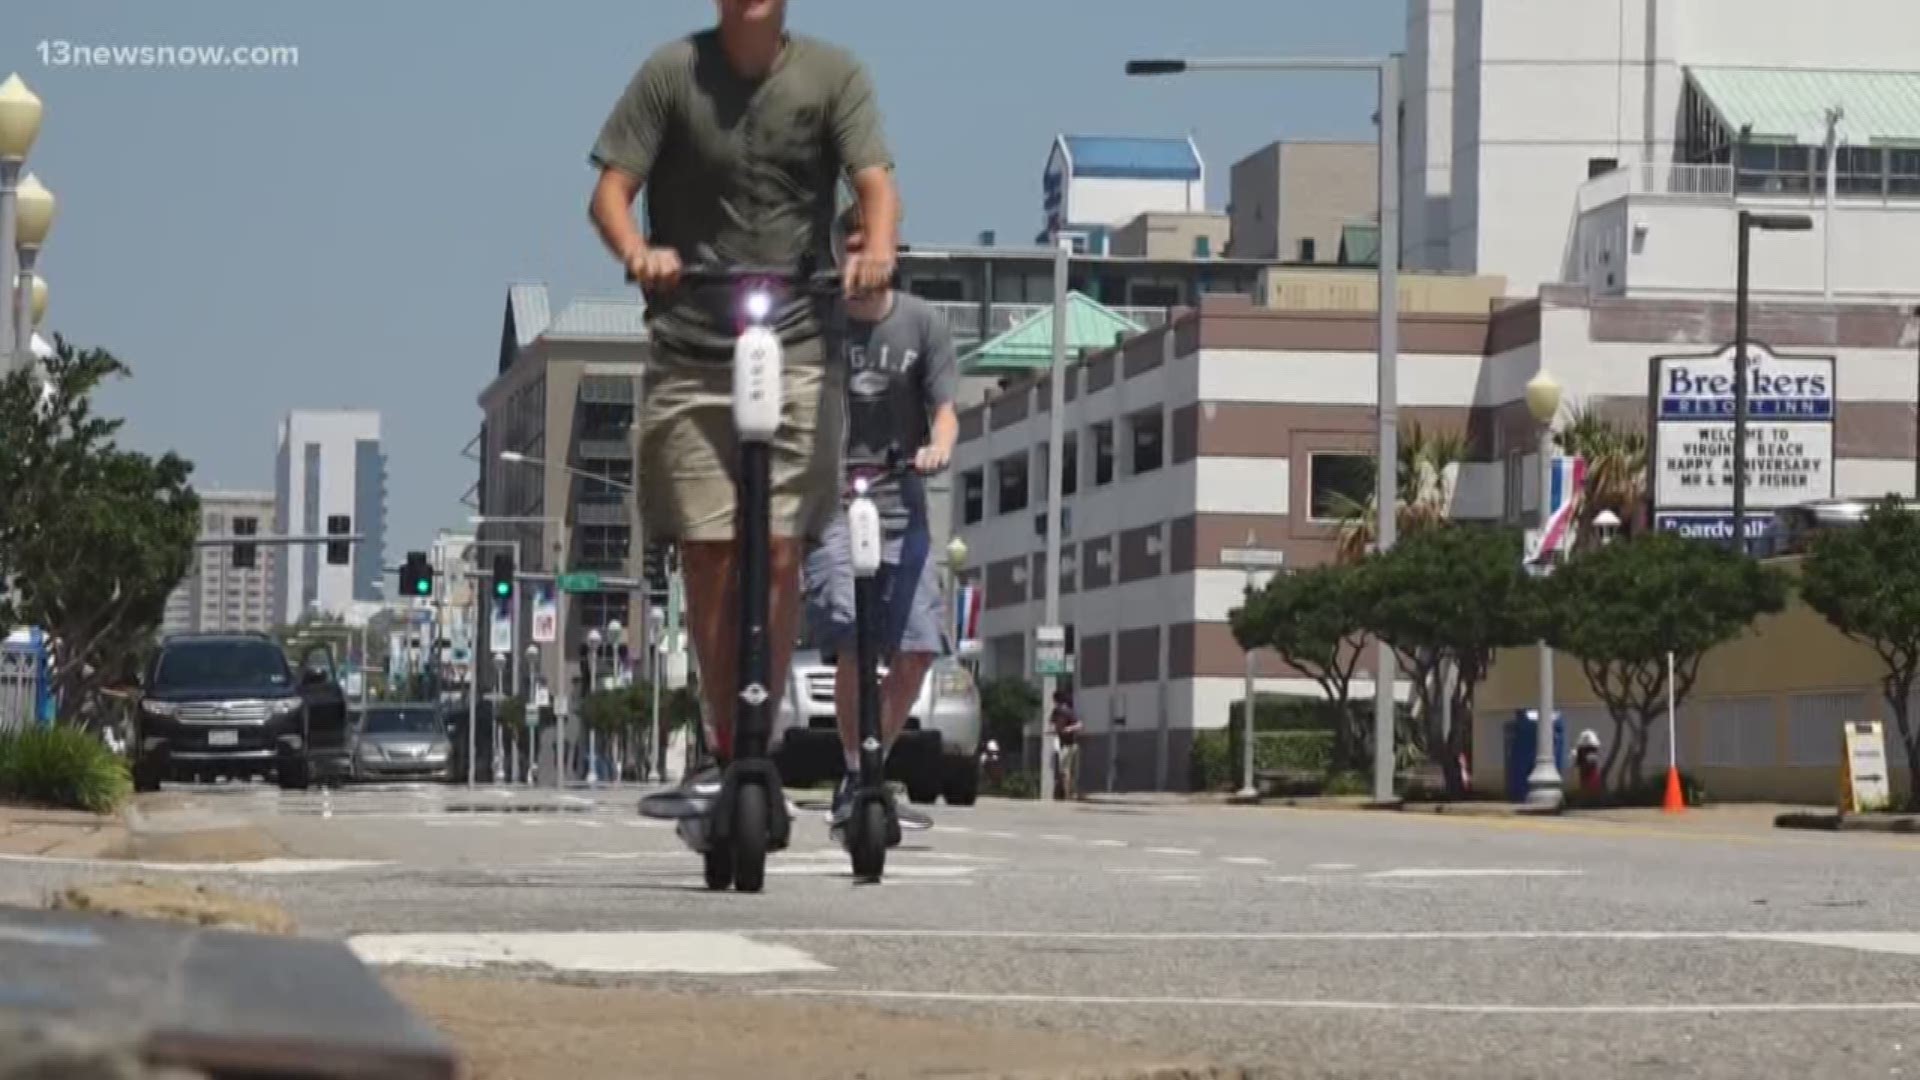 Virginia Beach City Council voted to ban scooters from the Oceanfront. According to data, Virginia Beach medics had to treat 65 people for scooter-related injuries.